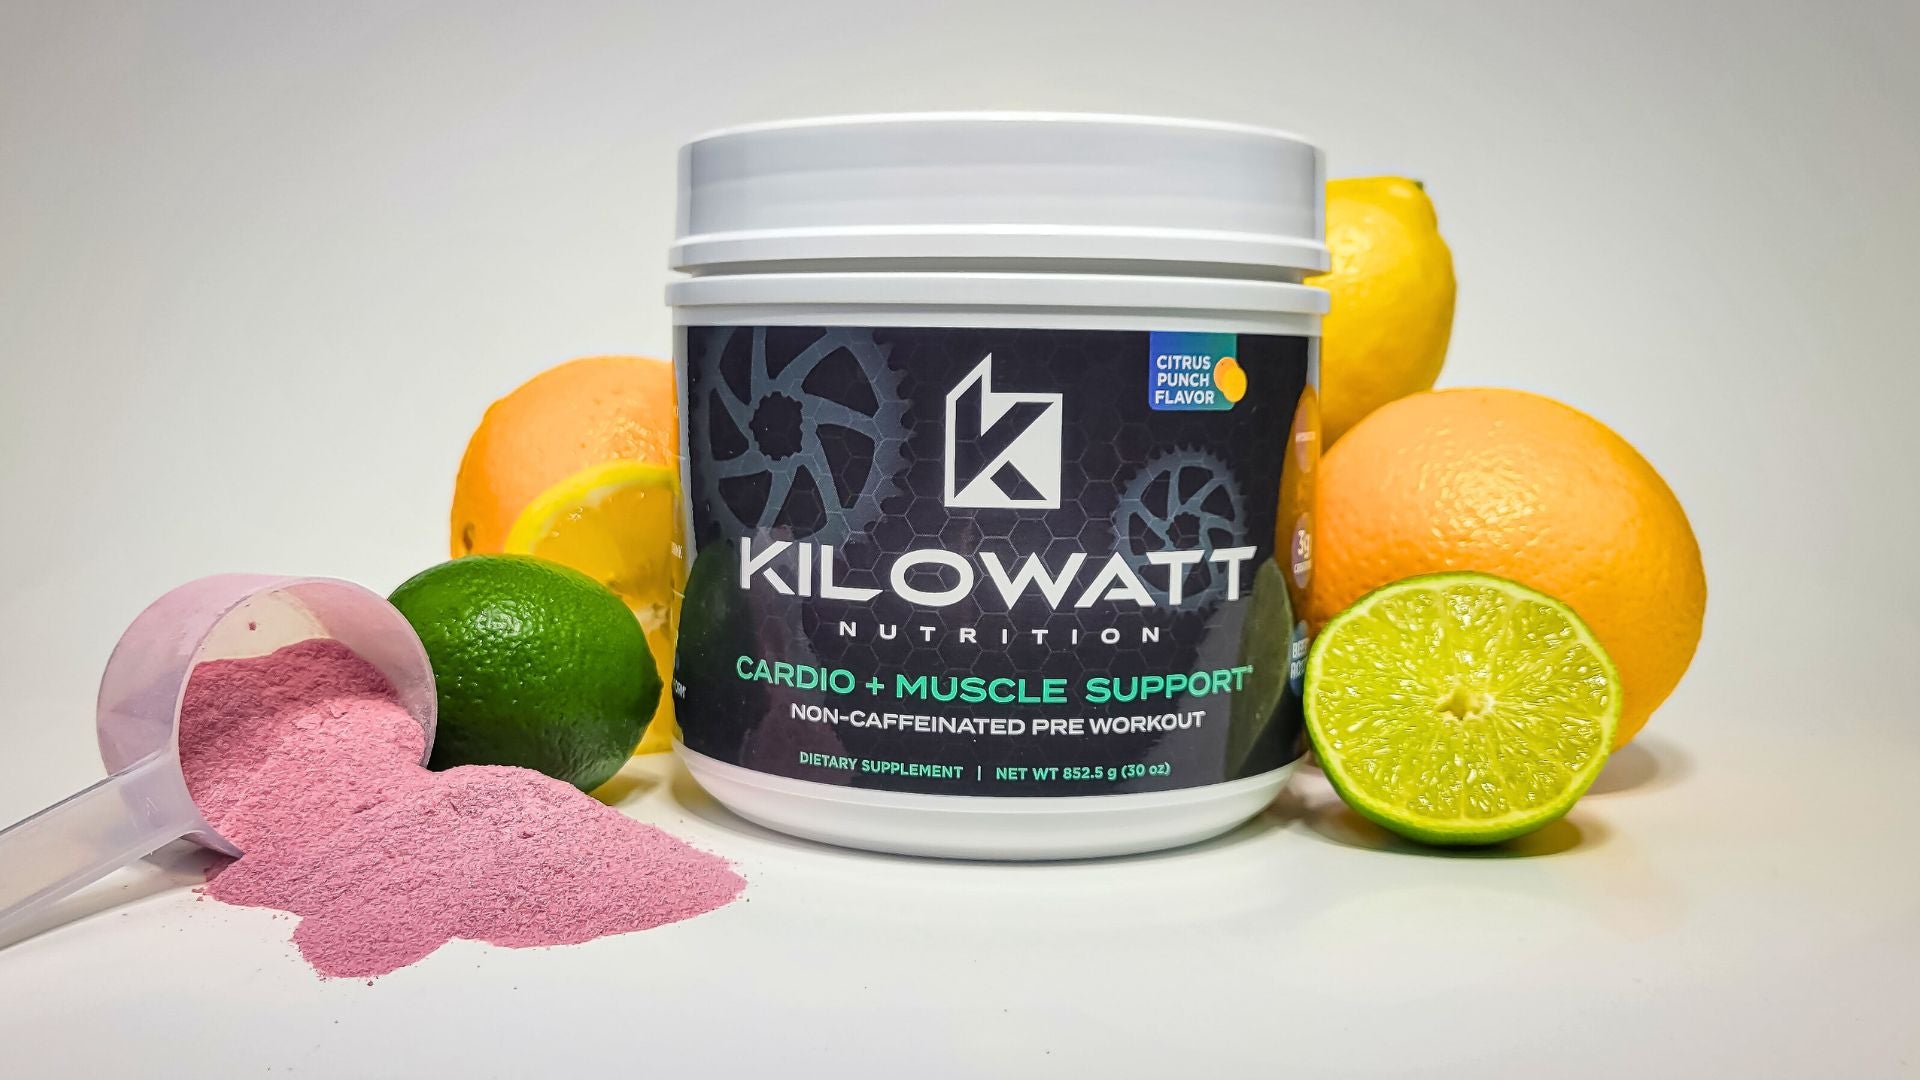 close up of bottle of Kilowatt Nutrition Cardio + Muscle Support pre workout drink powder